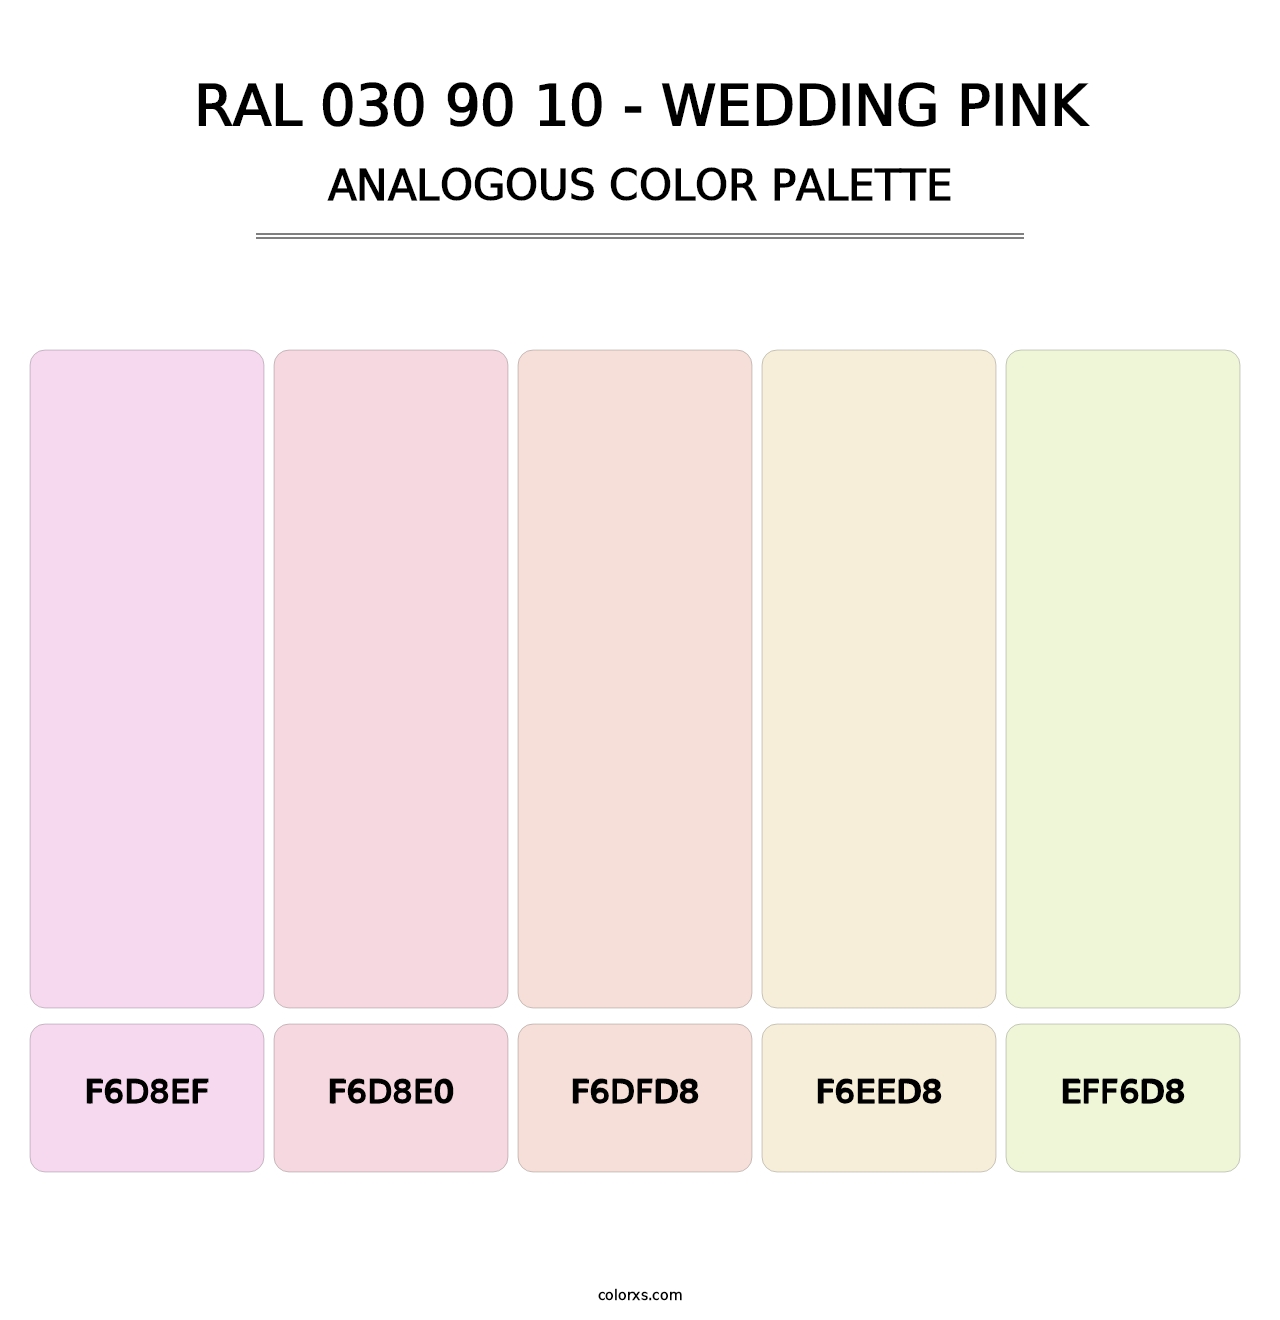 RAL 030 90 10 - Wedding Pink - Analogous Color Palette